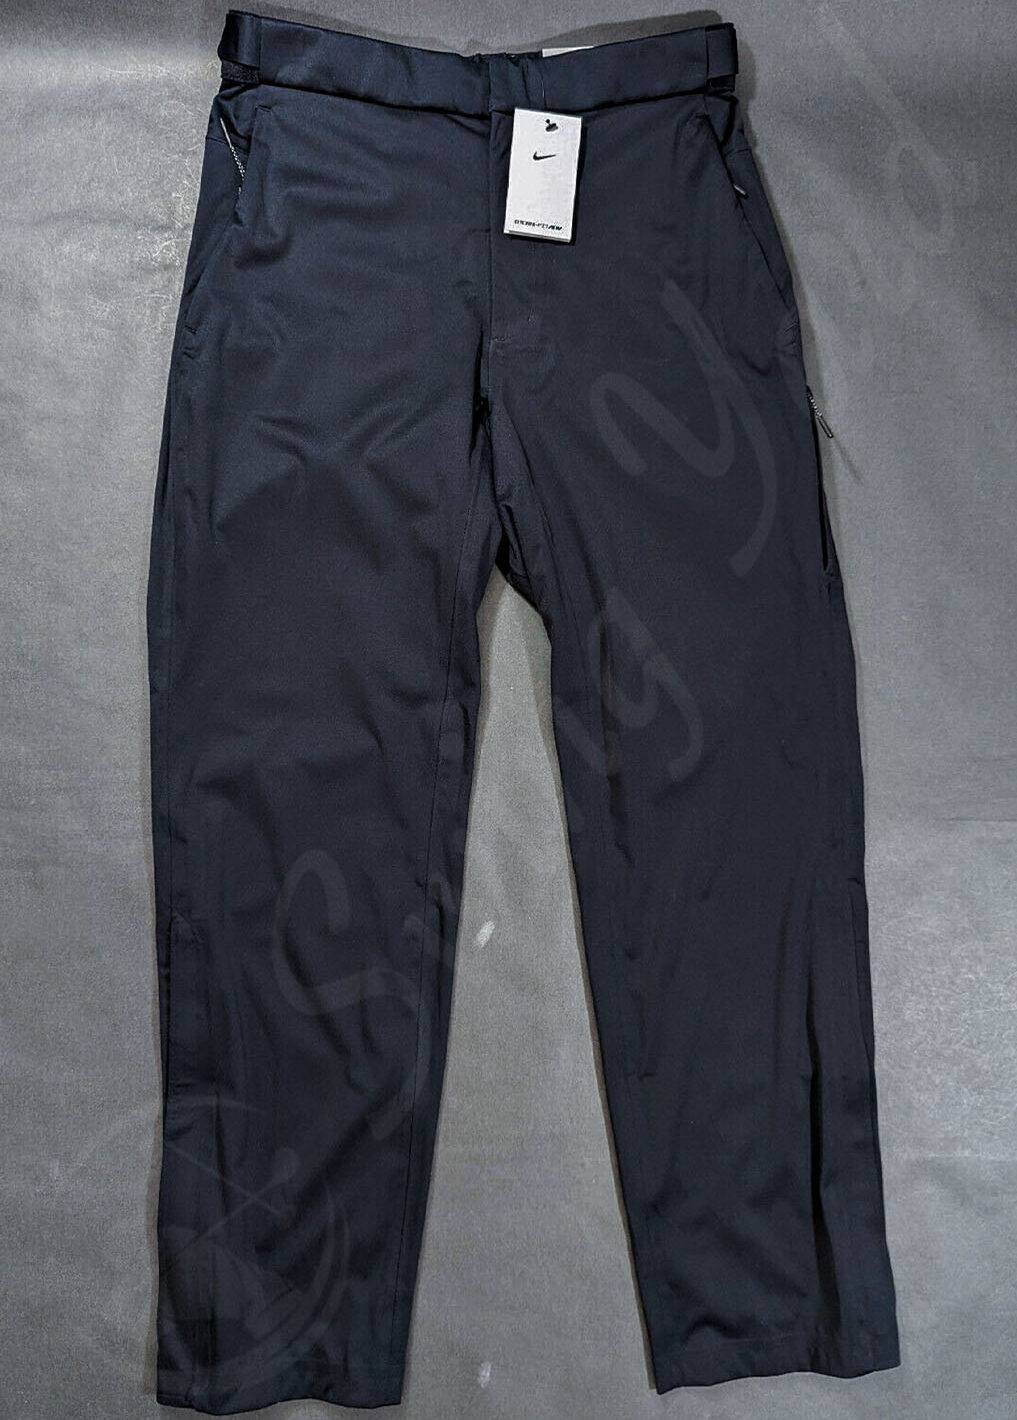 A Windproof and waterproof Nike storm fit advanced winter golf pants